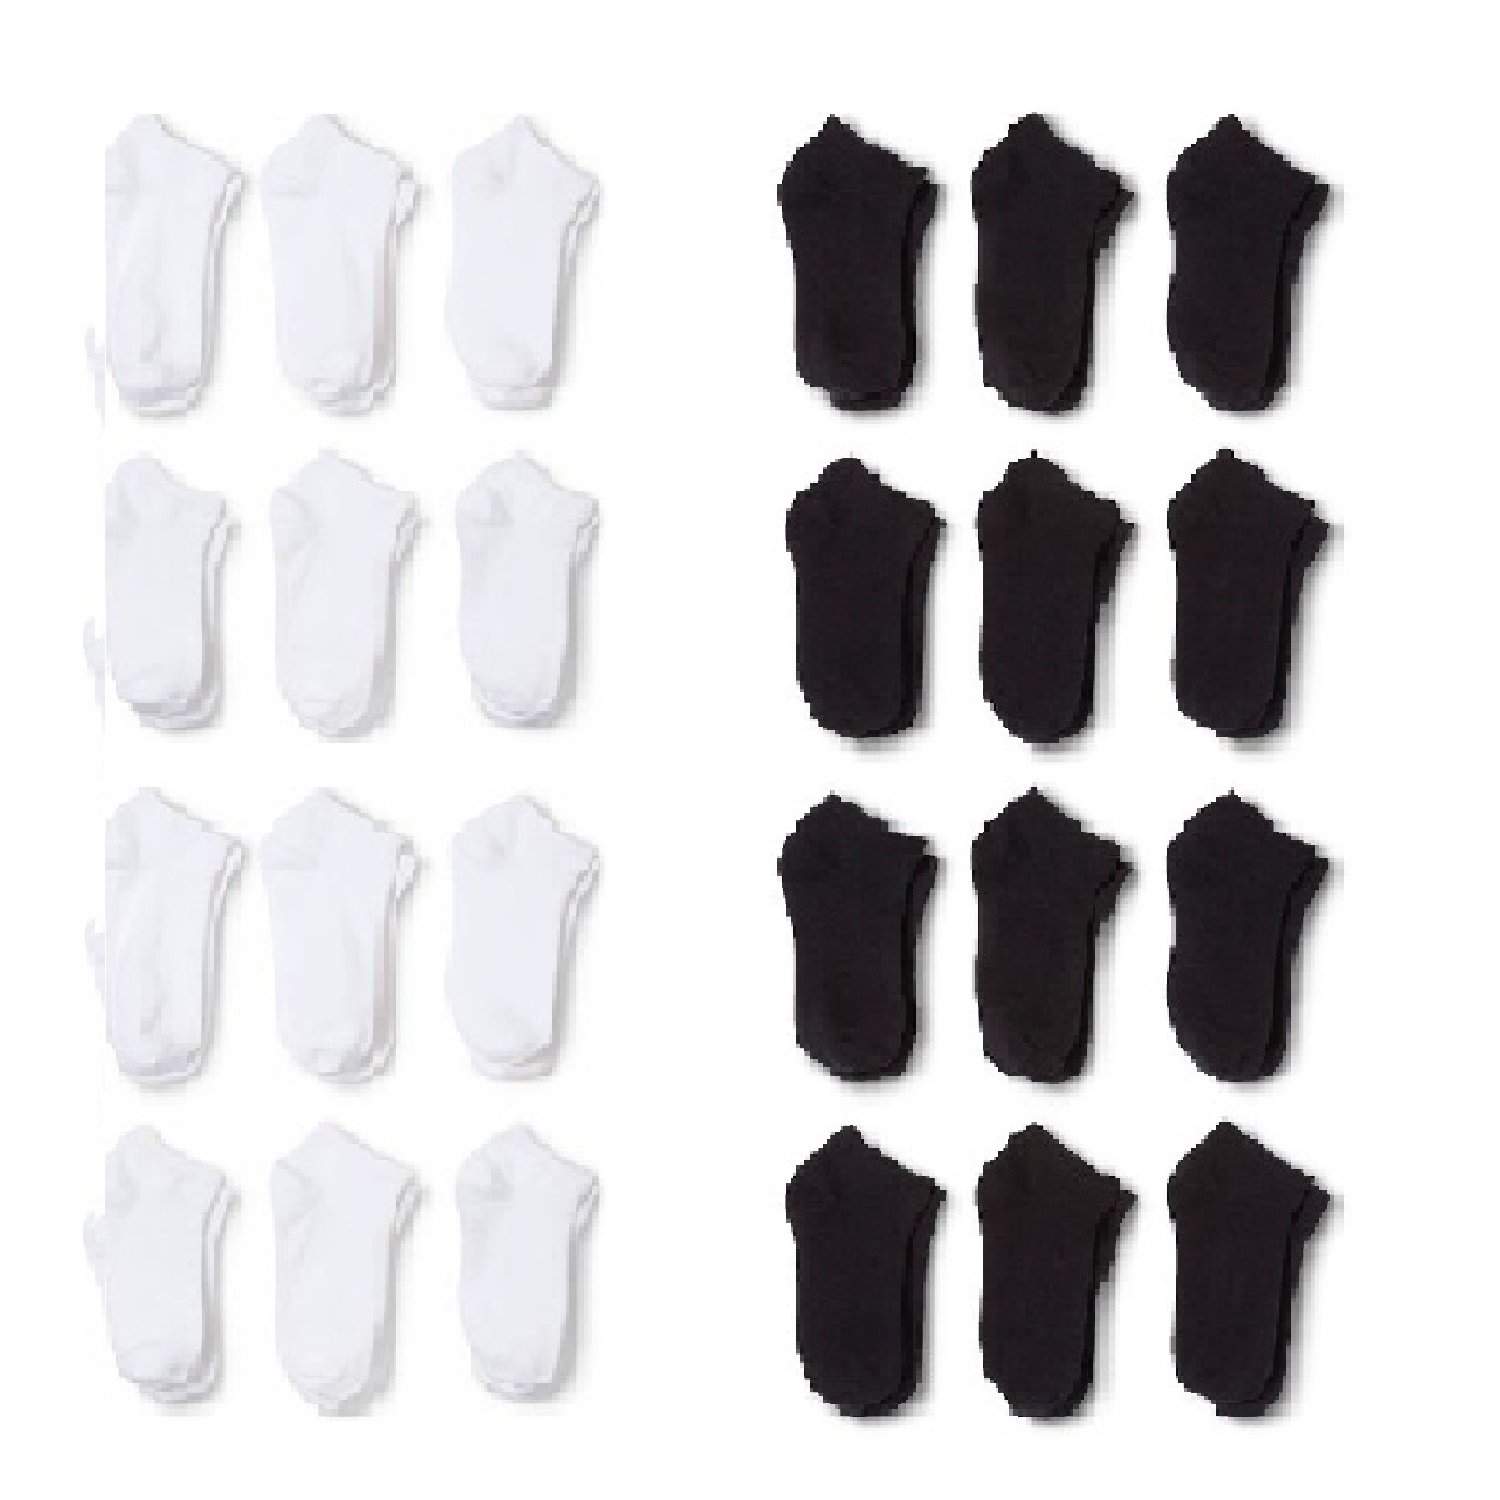 24 Pairs Men Low Cut Socks 9-11 or 6-8 Black or White or Mixed